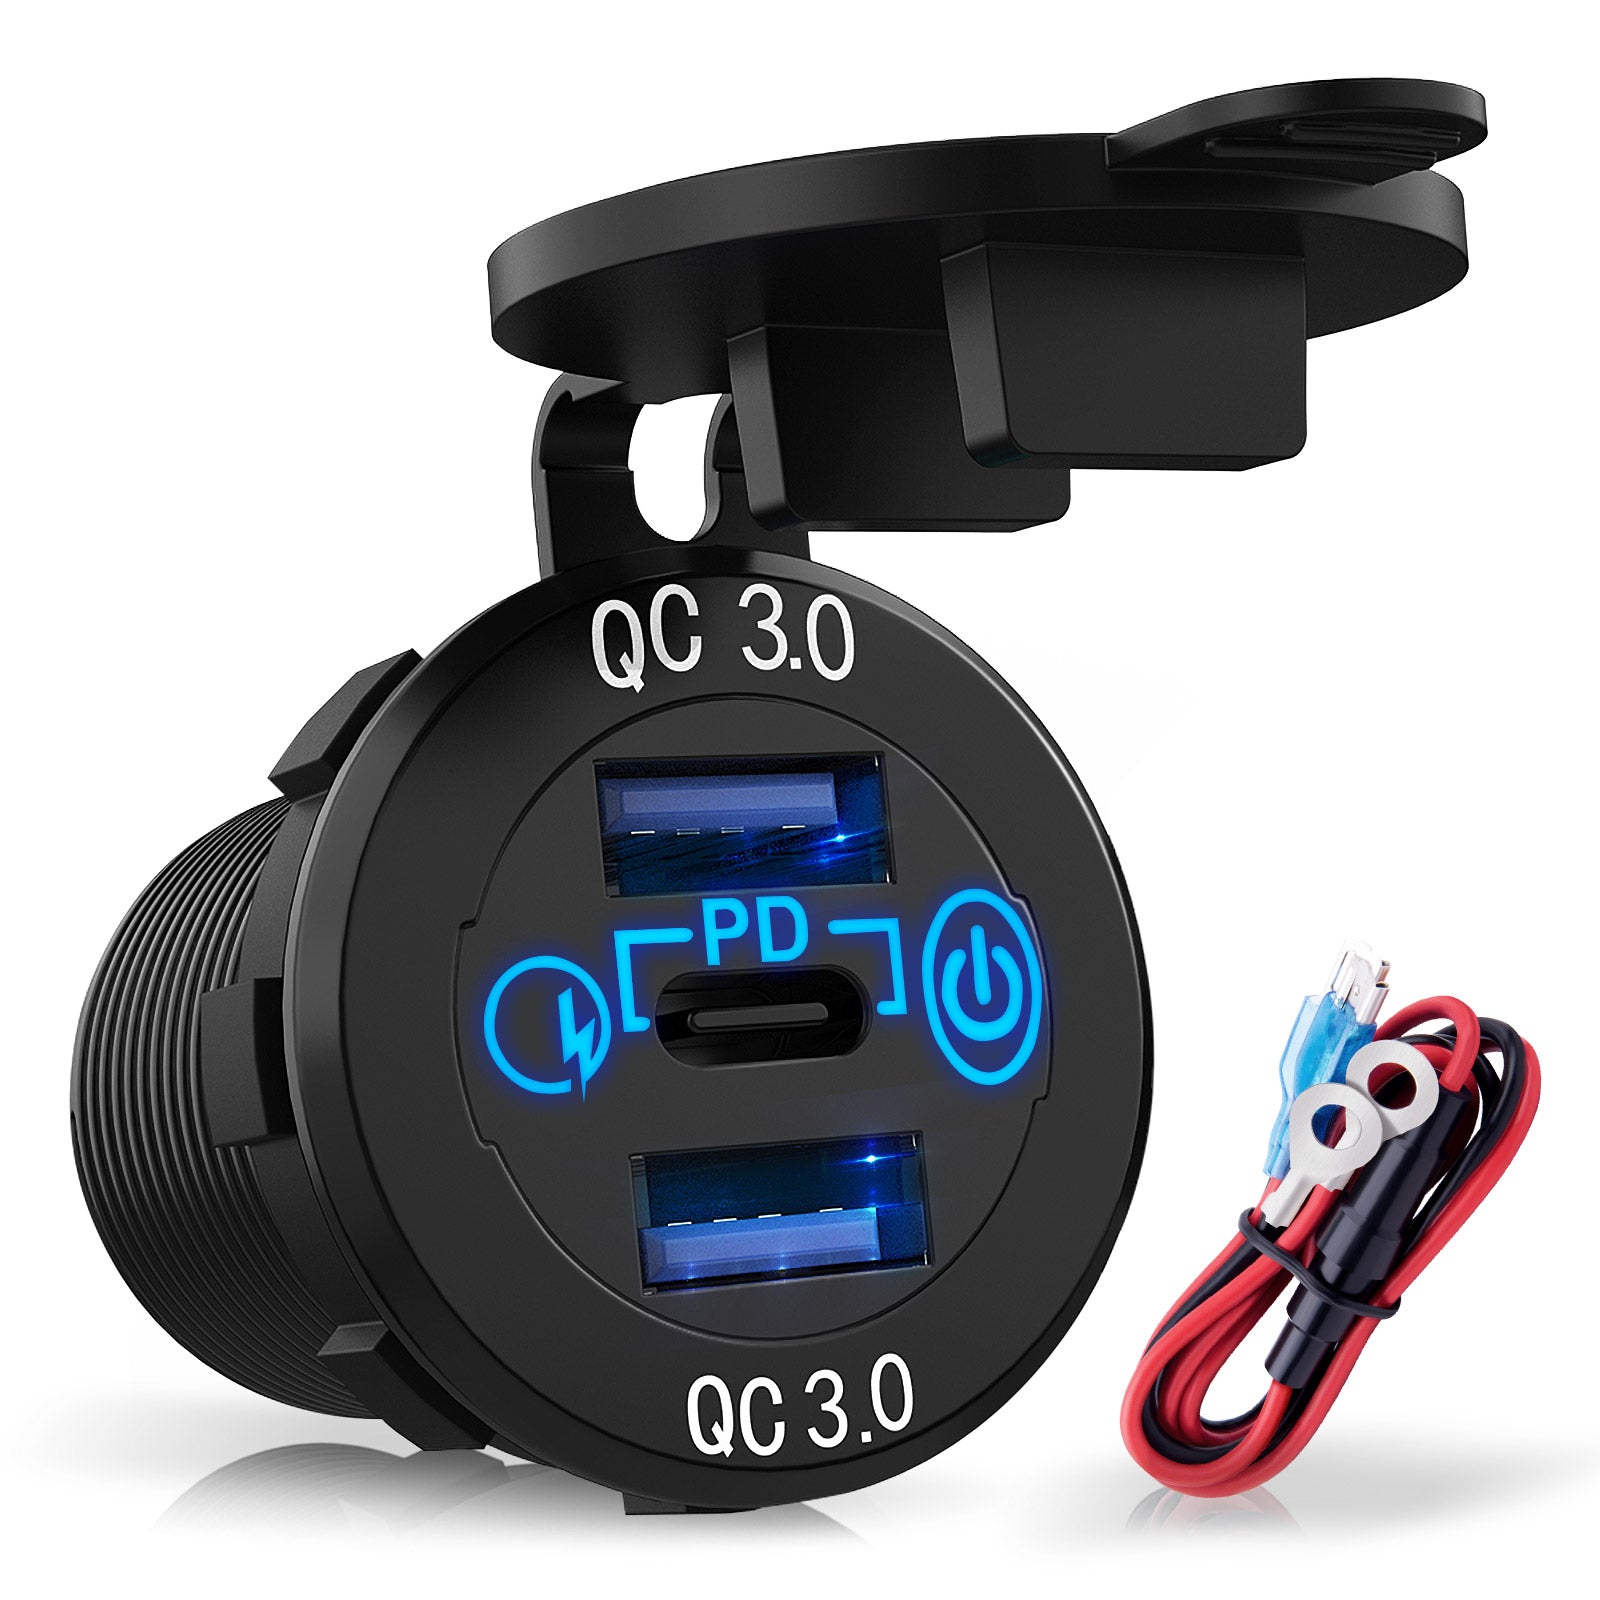 12V/24V USB C Car Charger Socket, Multiple USB Outlet 30W PD USB-C & Two QC3.0 Ports with Touch Switch Aluminum Metal